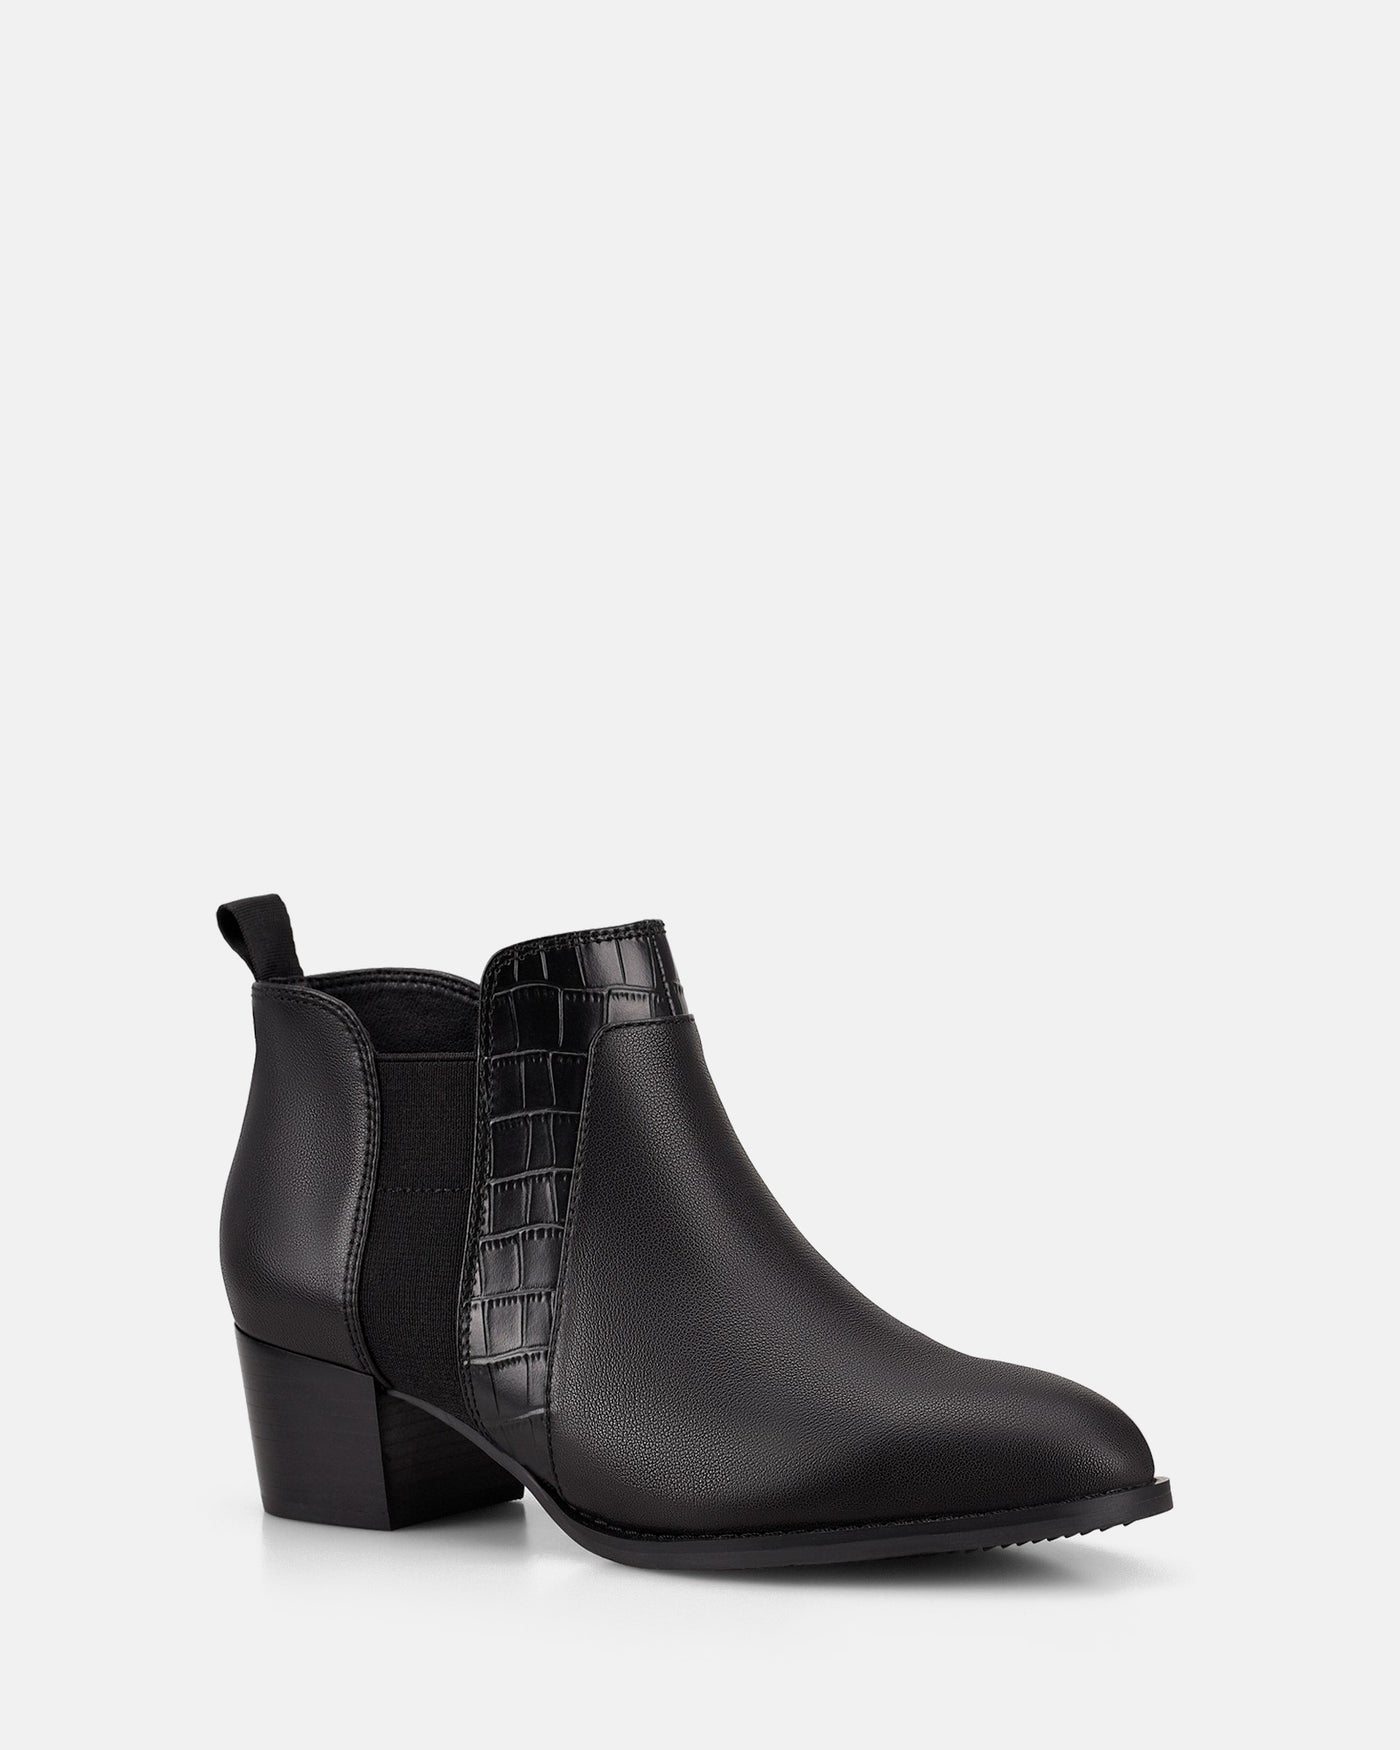 HUSH PUPPIES CHILL BLACK - Women Boots - Collective Shoes 